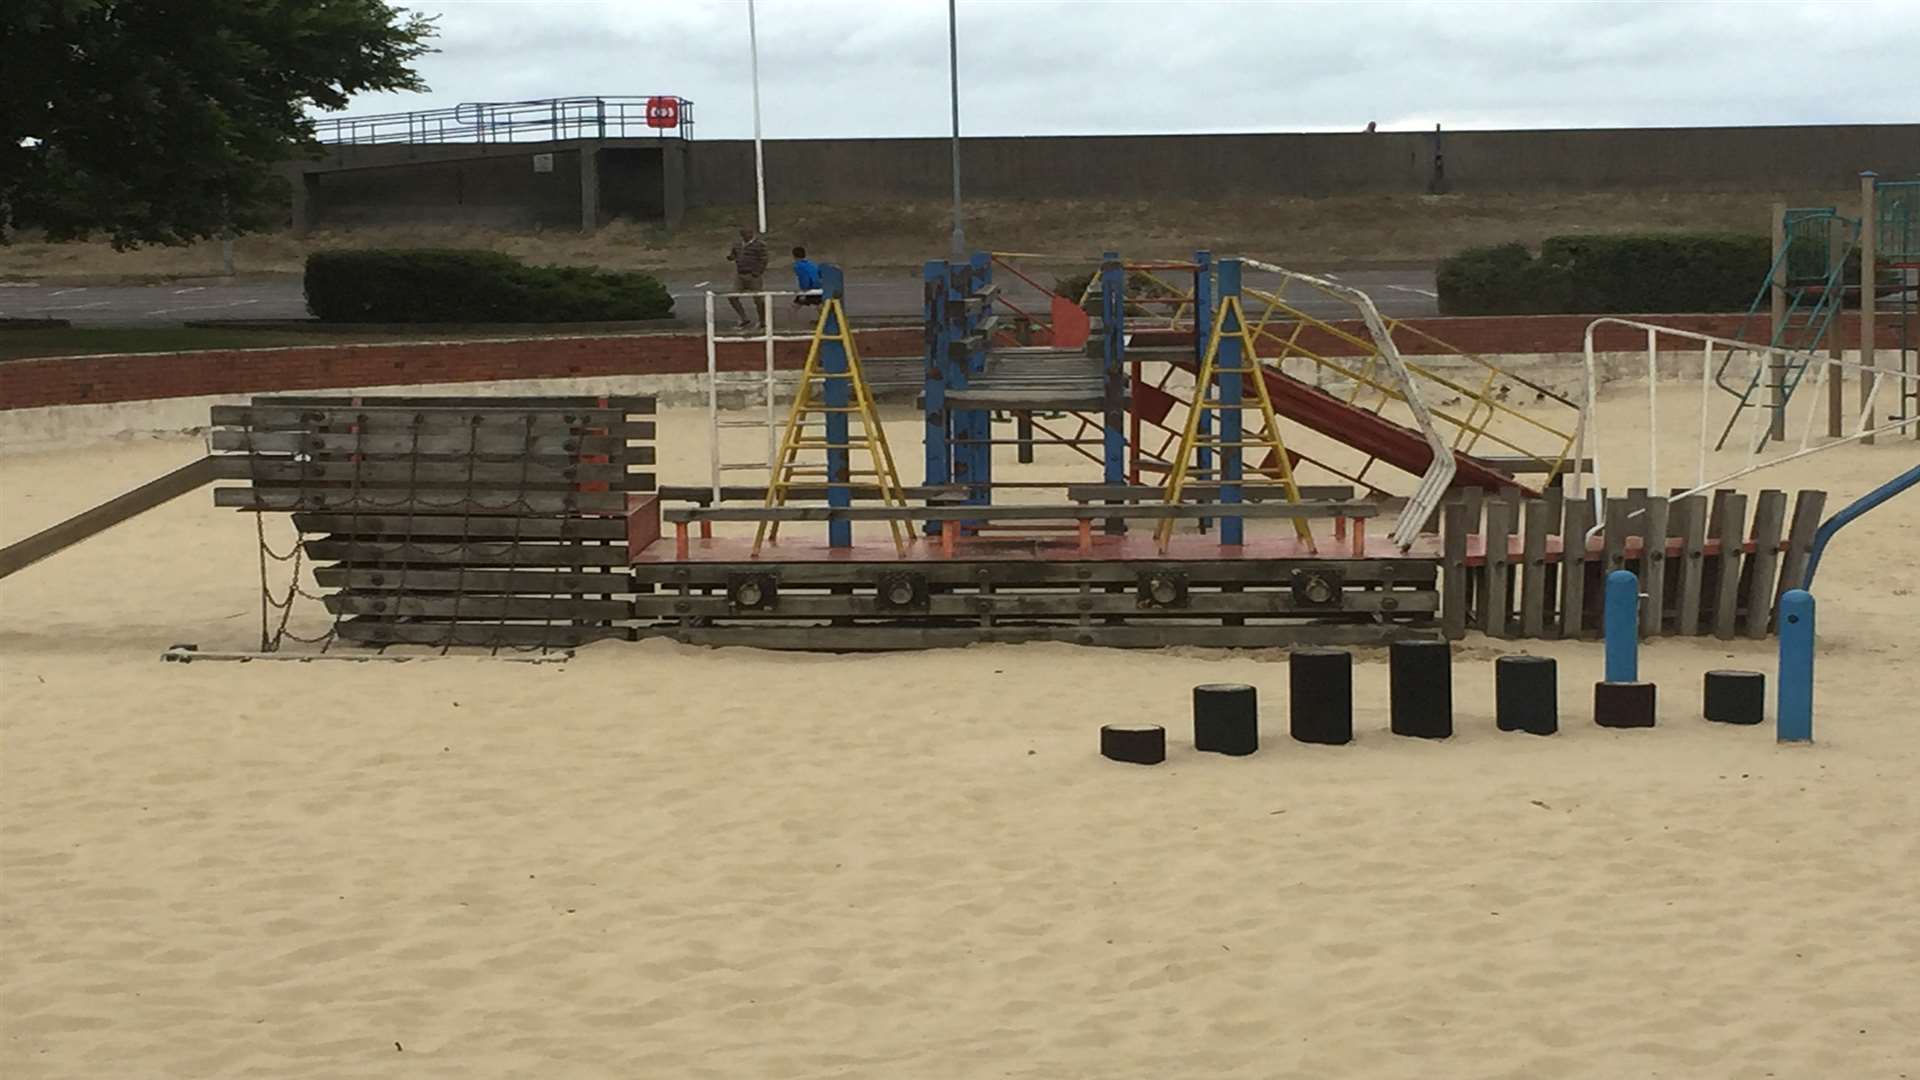 The climbing frame in the sand pit, Beachfields